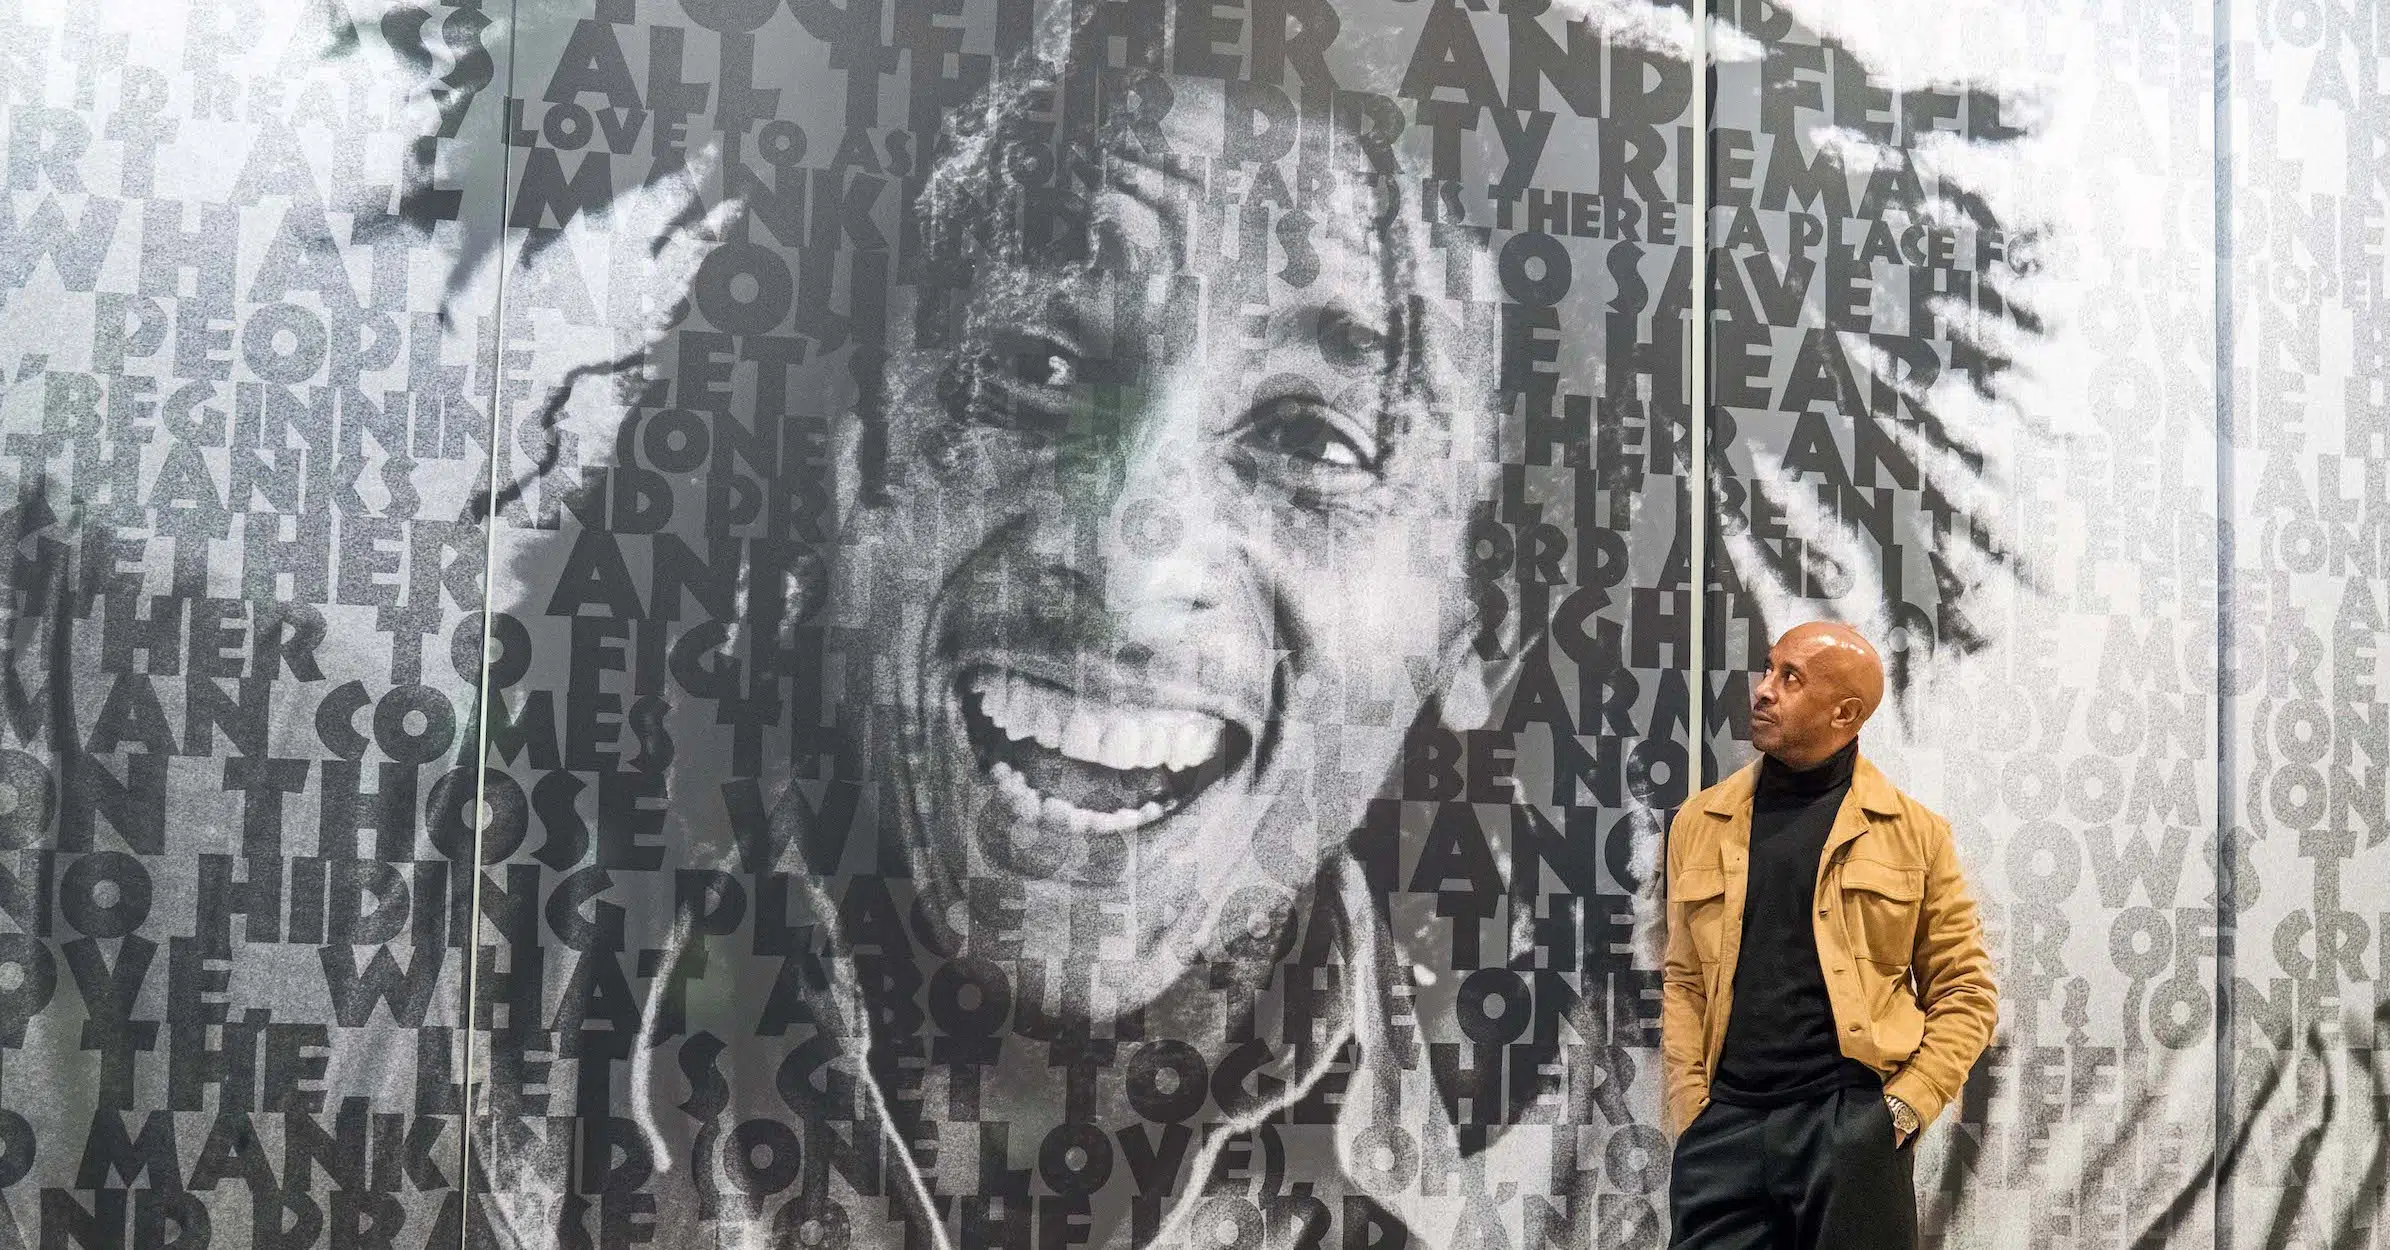 Bob marley one love experience at the saatchi gallery chelsea